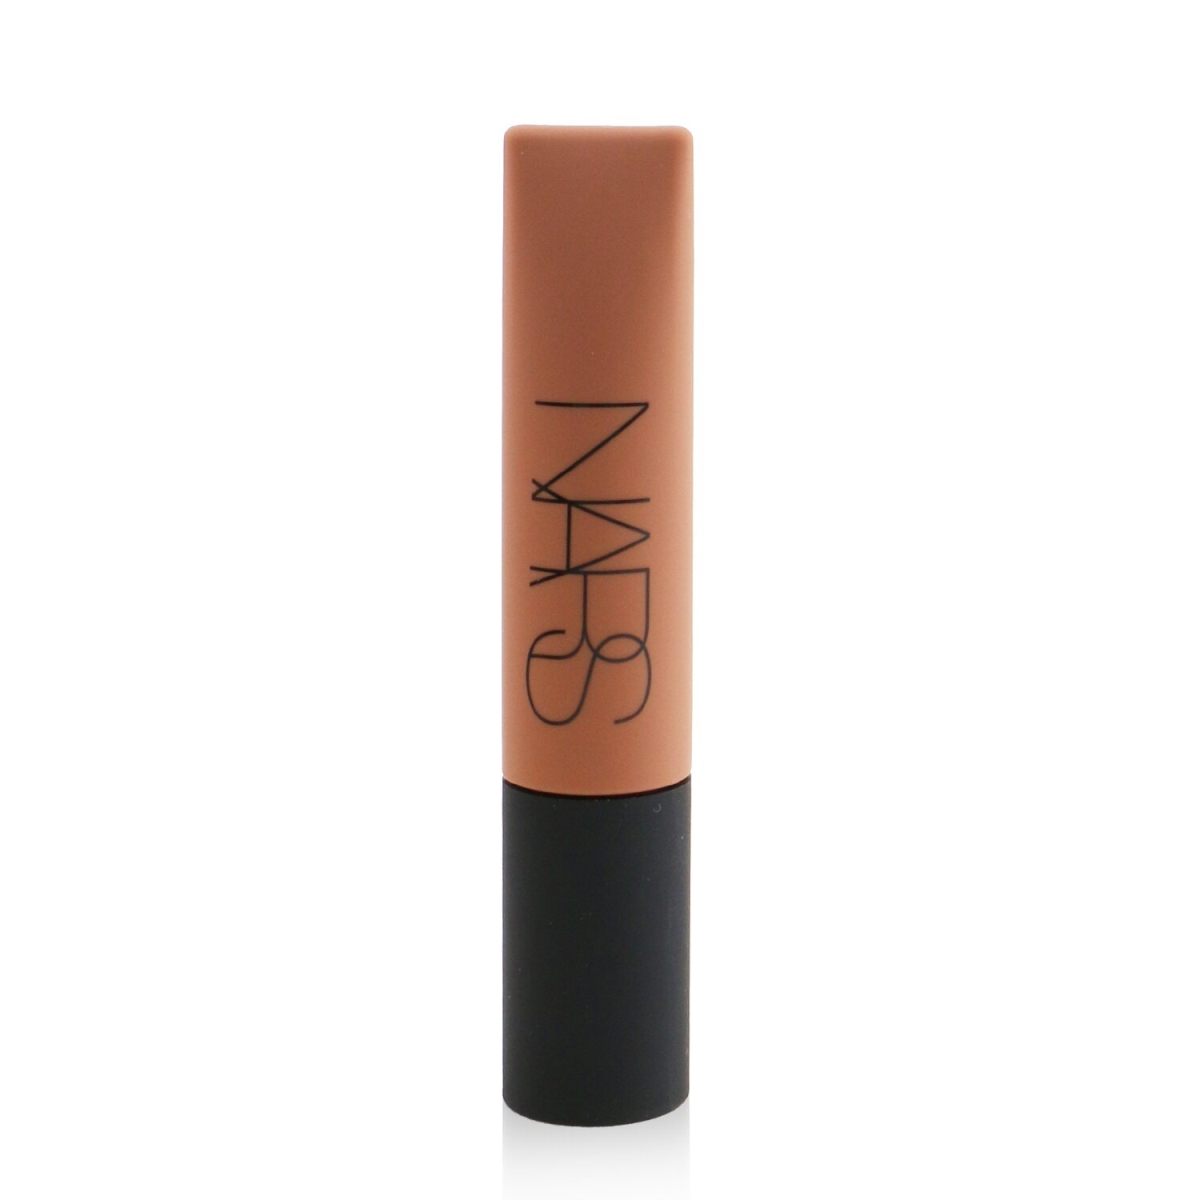 Picture of Nars 270544 0.24 oz Air Matte Lip Color - No.Surrender Taupe Nude